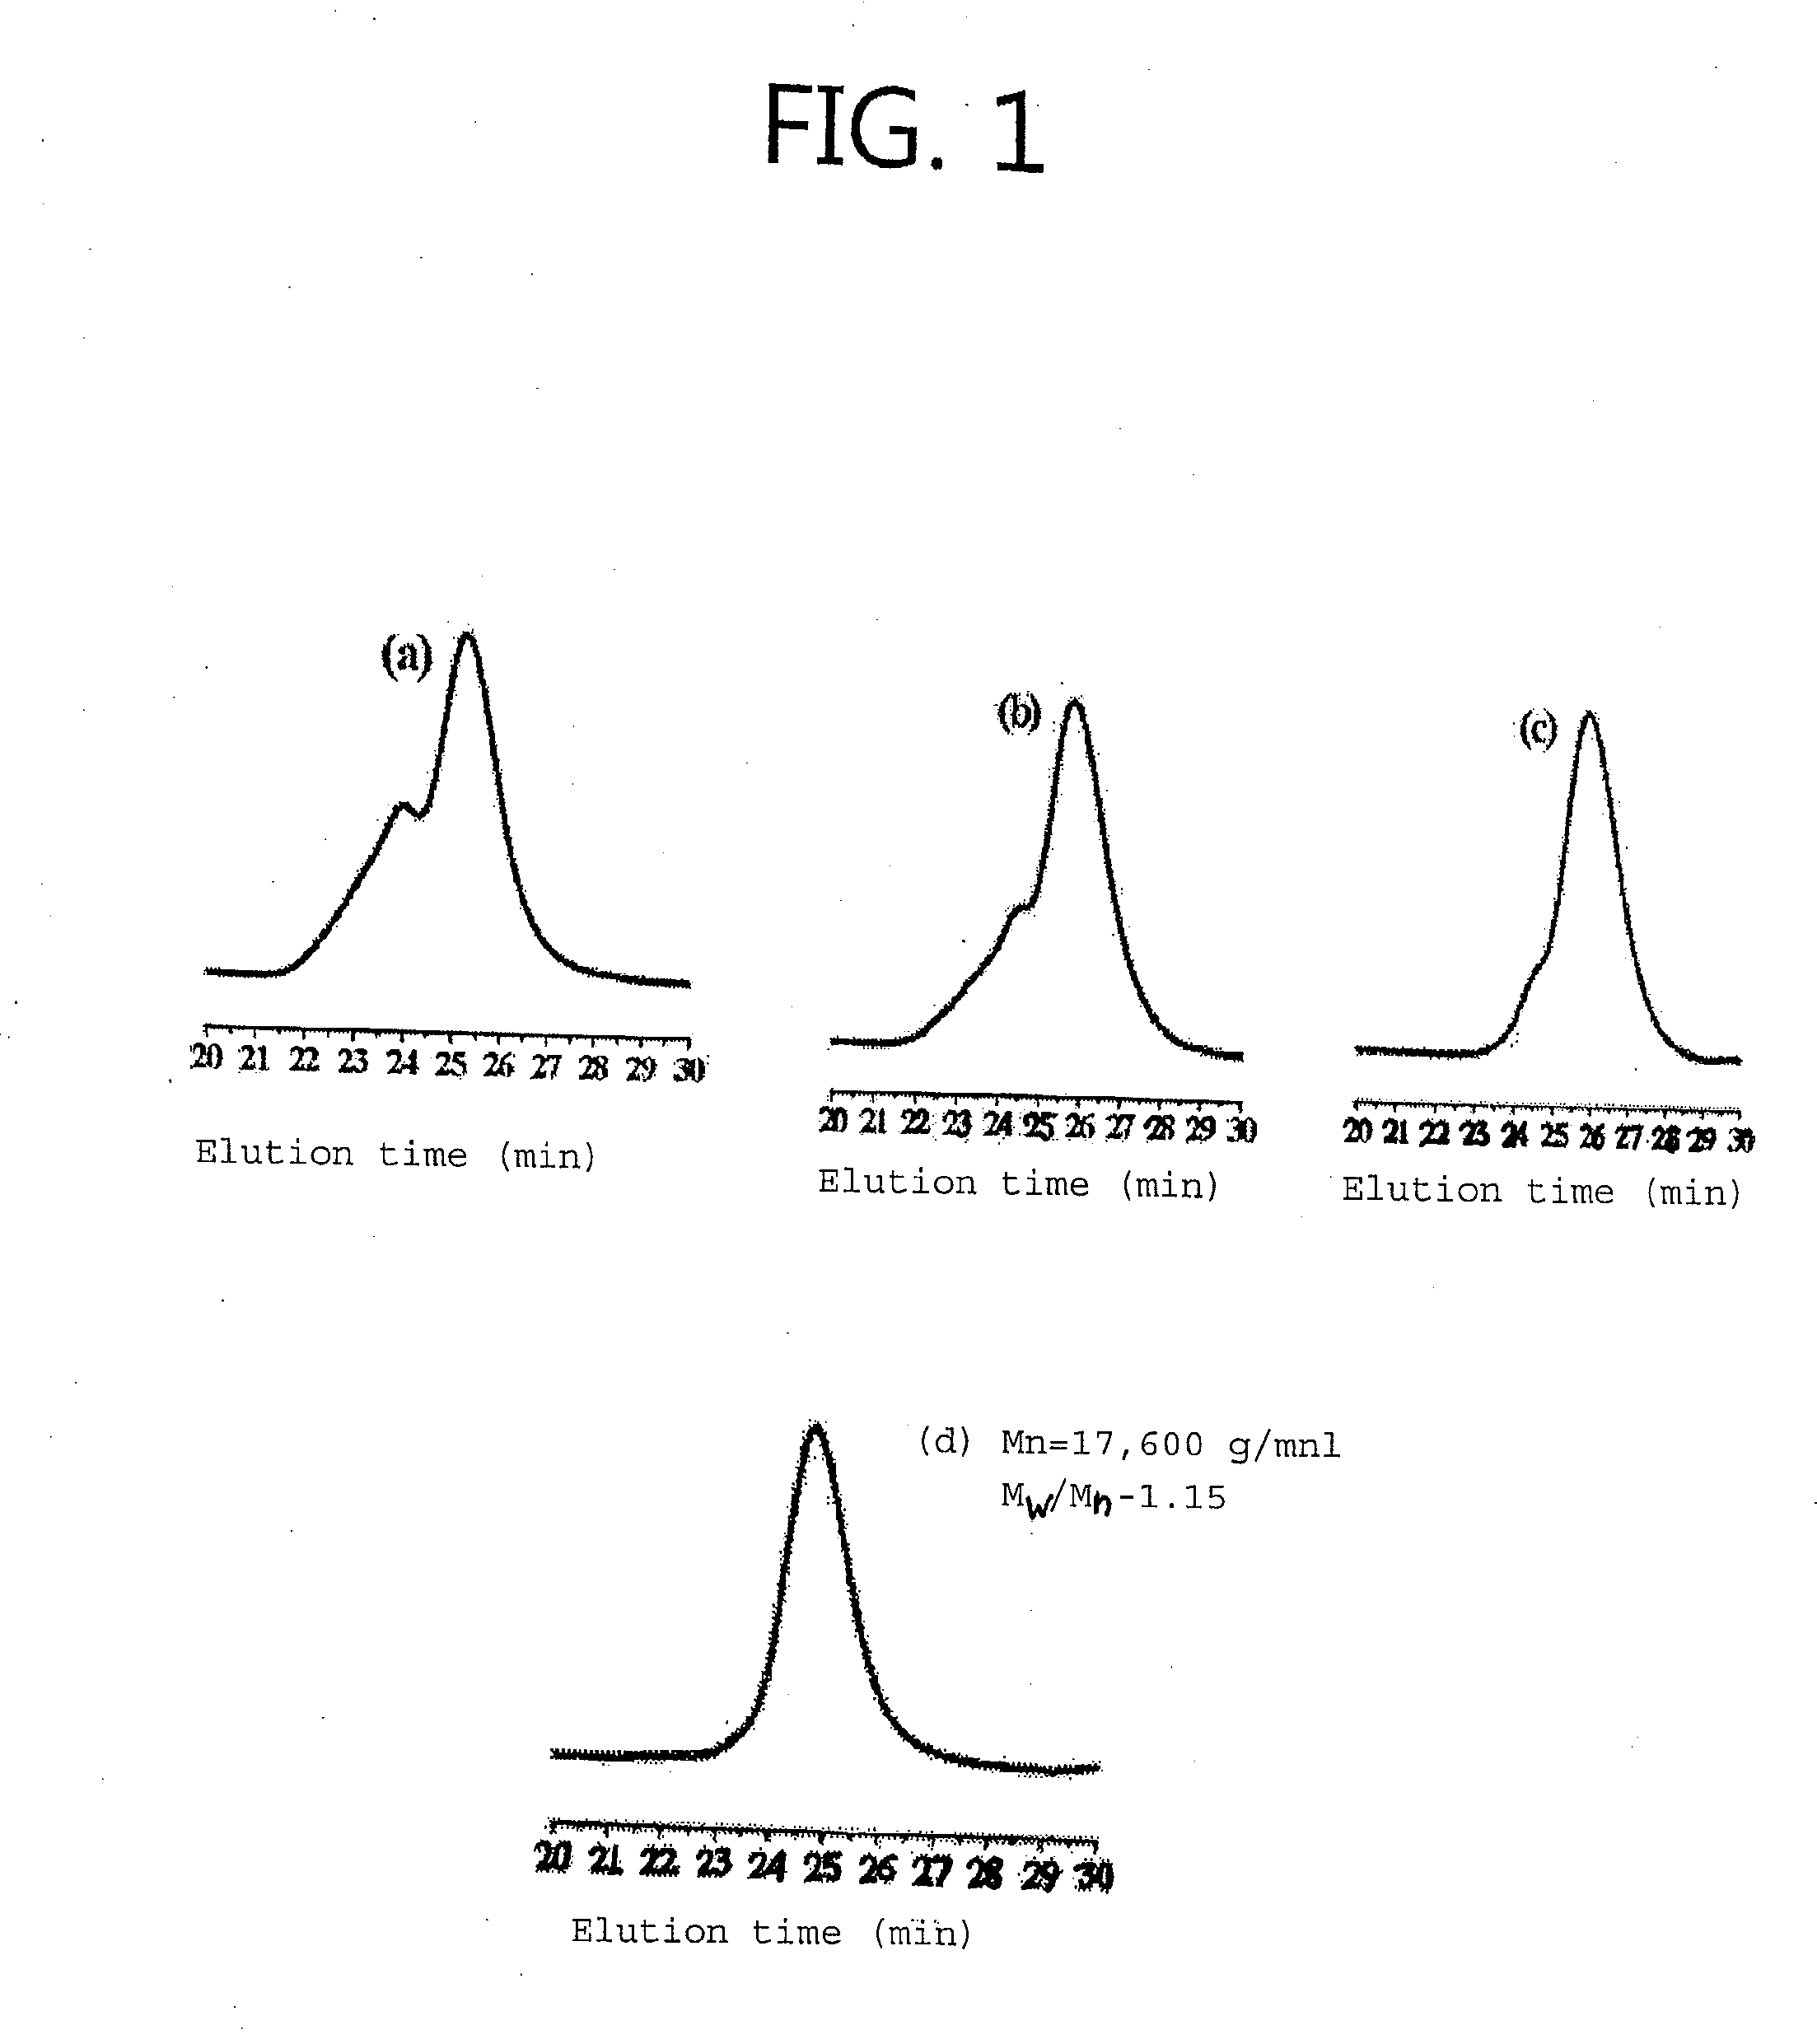 Anionic polymerization method for styrene derivative containing pyridine as functional group